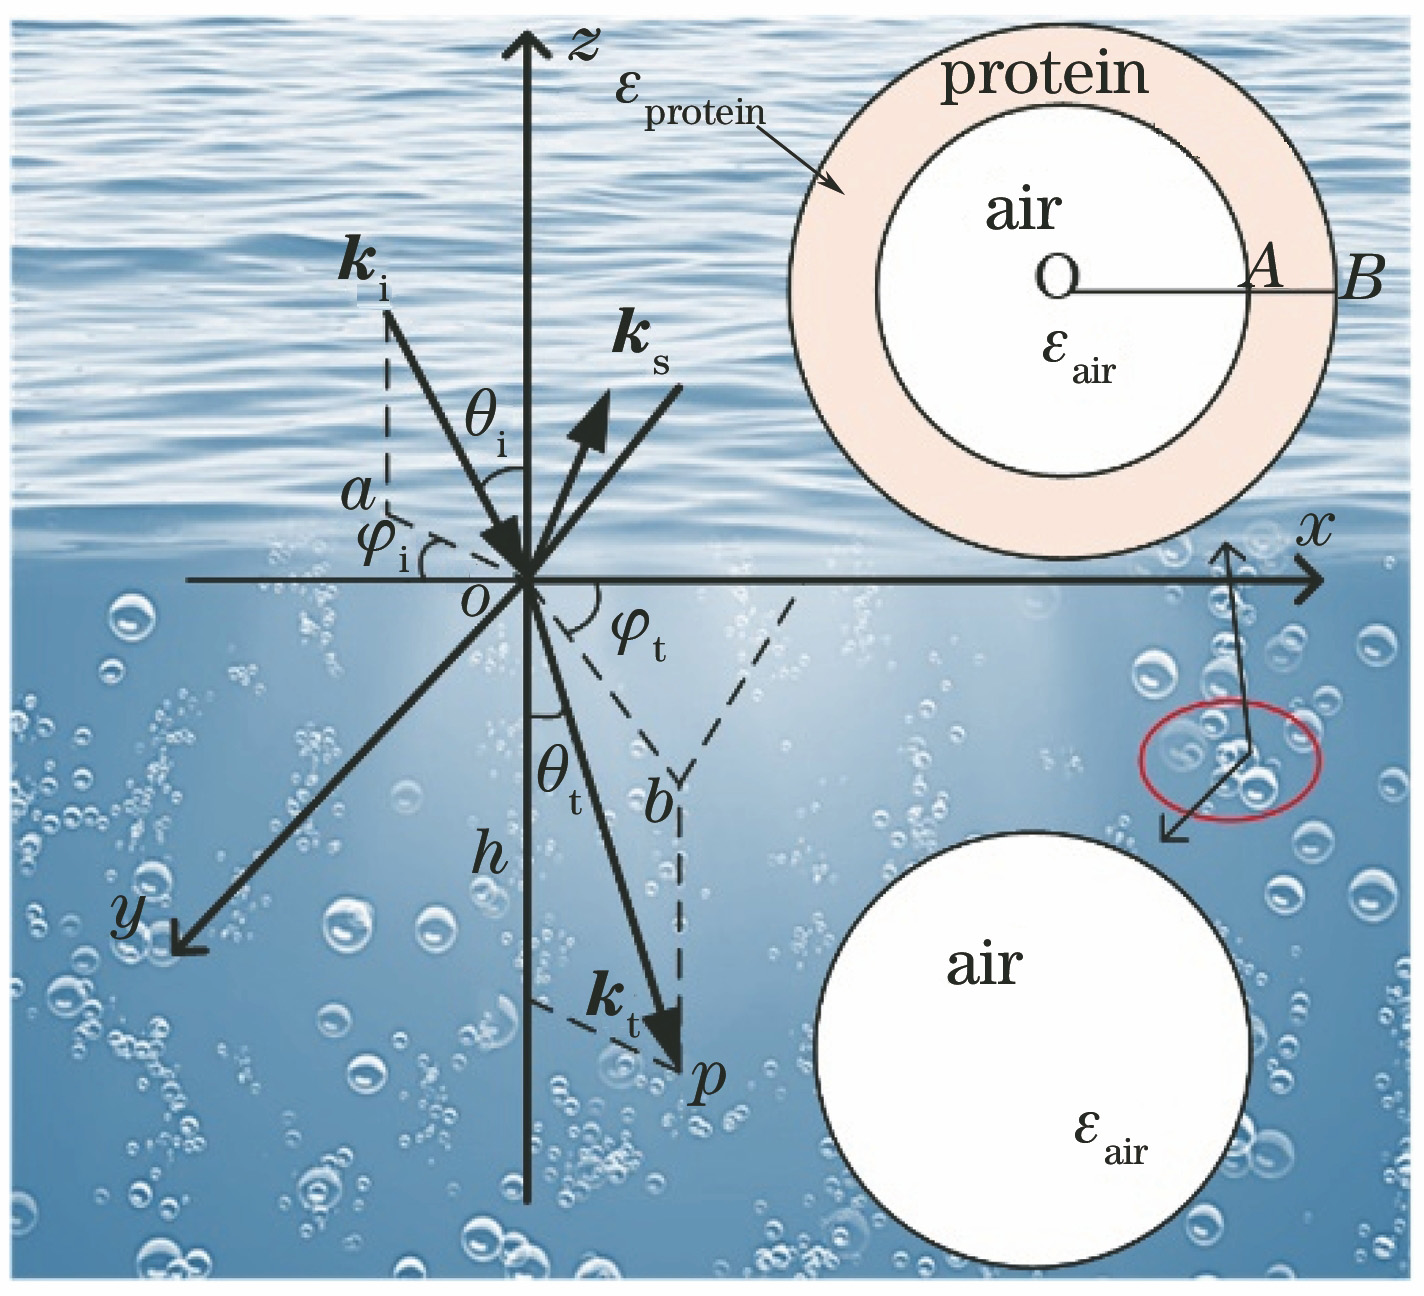 Schematic diagram of laser transmission and bubble structure of sea surface-bubble layer